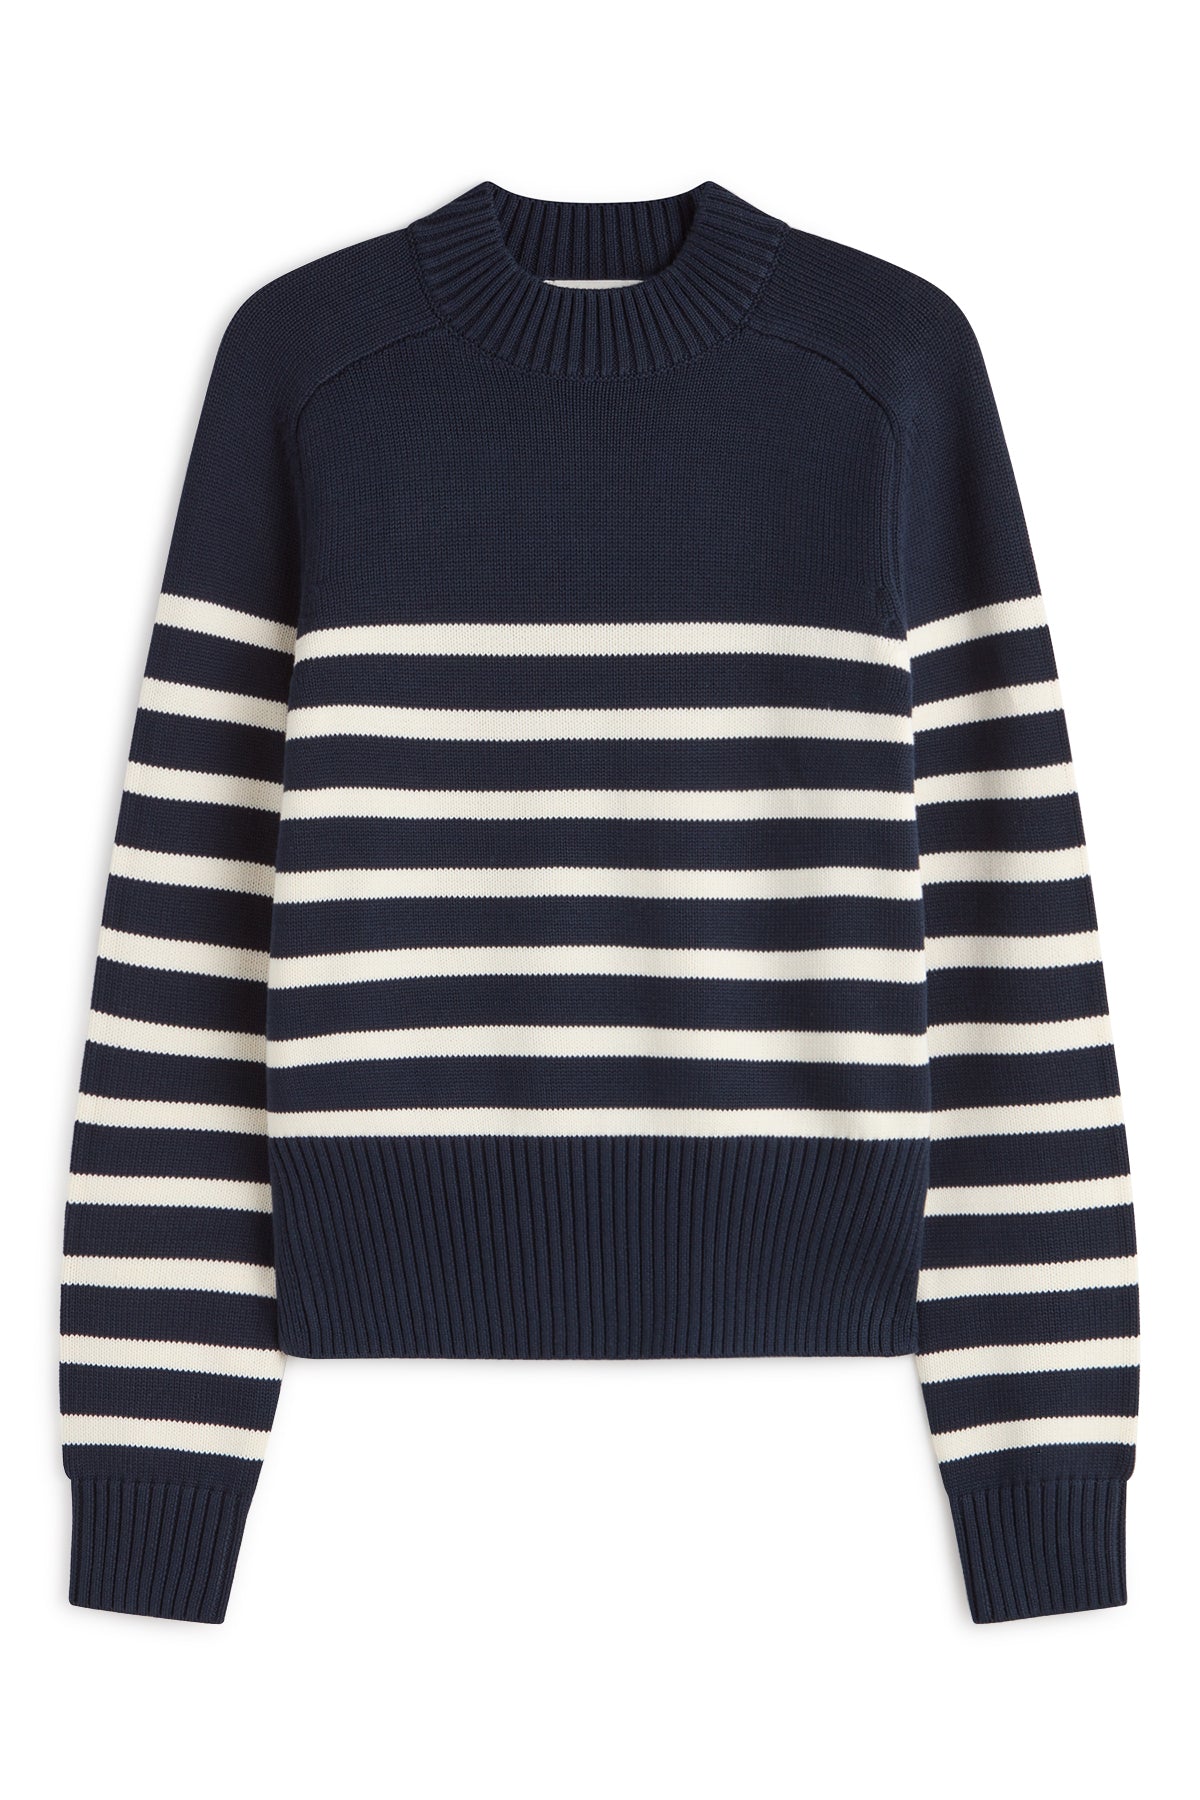 NAVY BLUE MOLIE KNITTED SWEATER